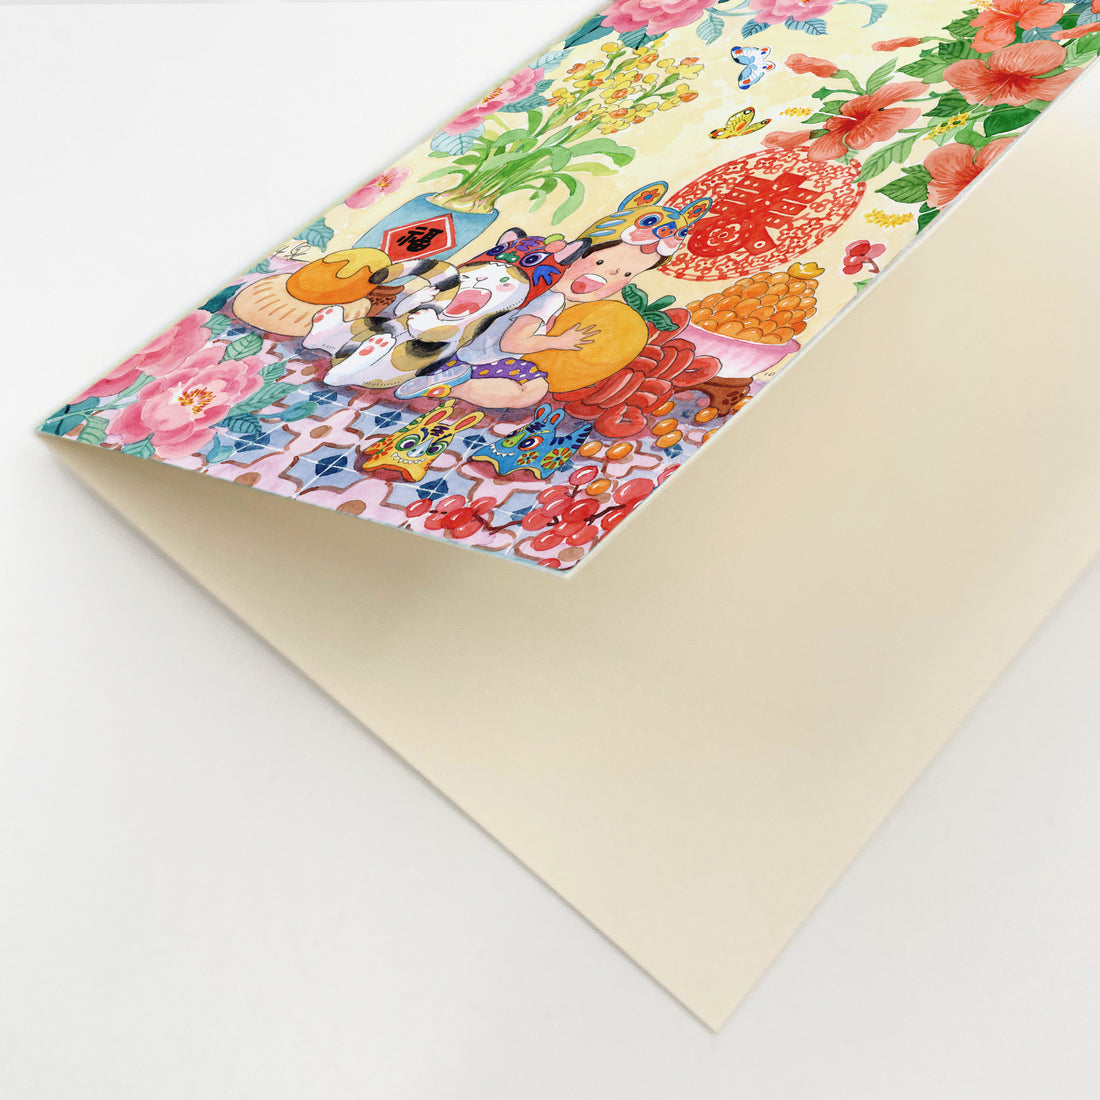 Ah Guo CNY 2022 Greeting Card Little Spring Happiness (LARGE A4 SIZE)